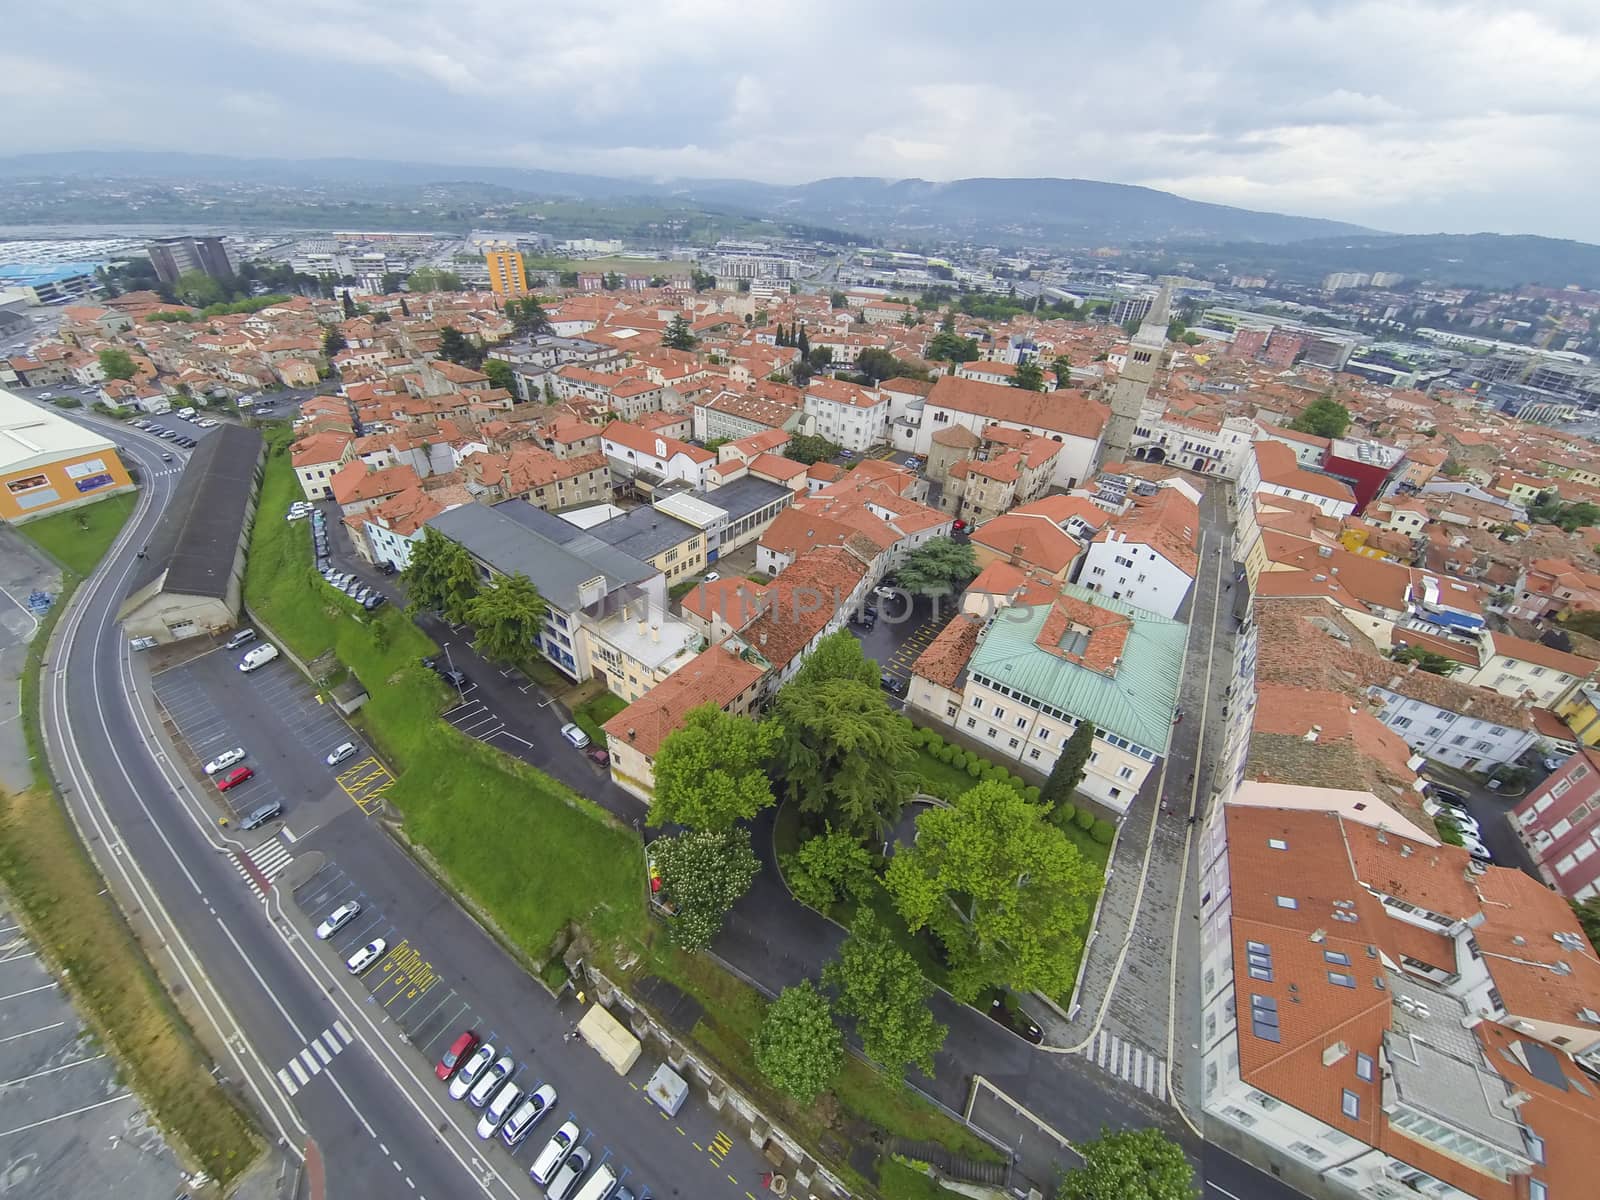 Aerial view on Koper in Slovenia.